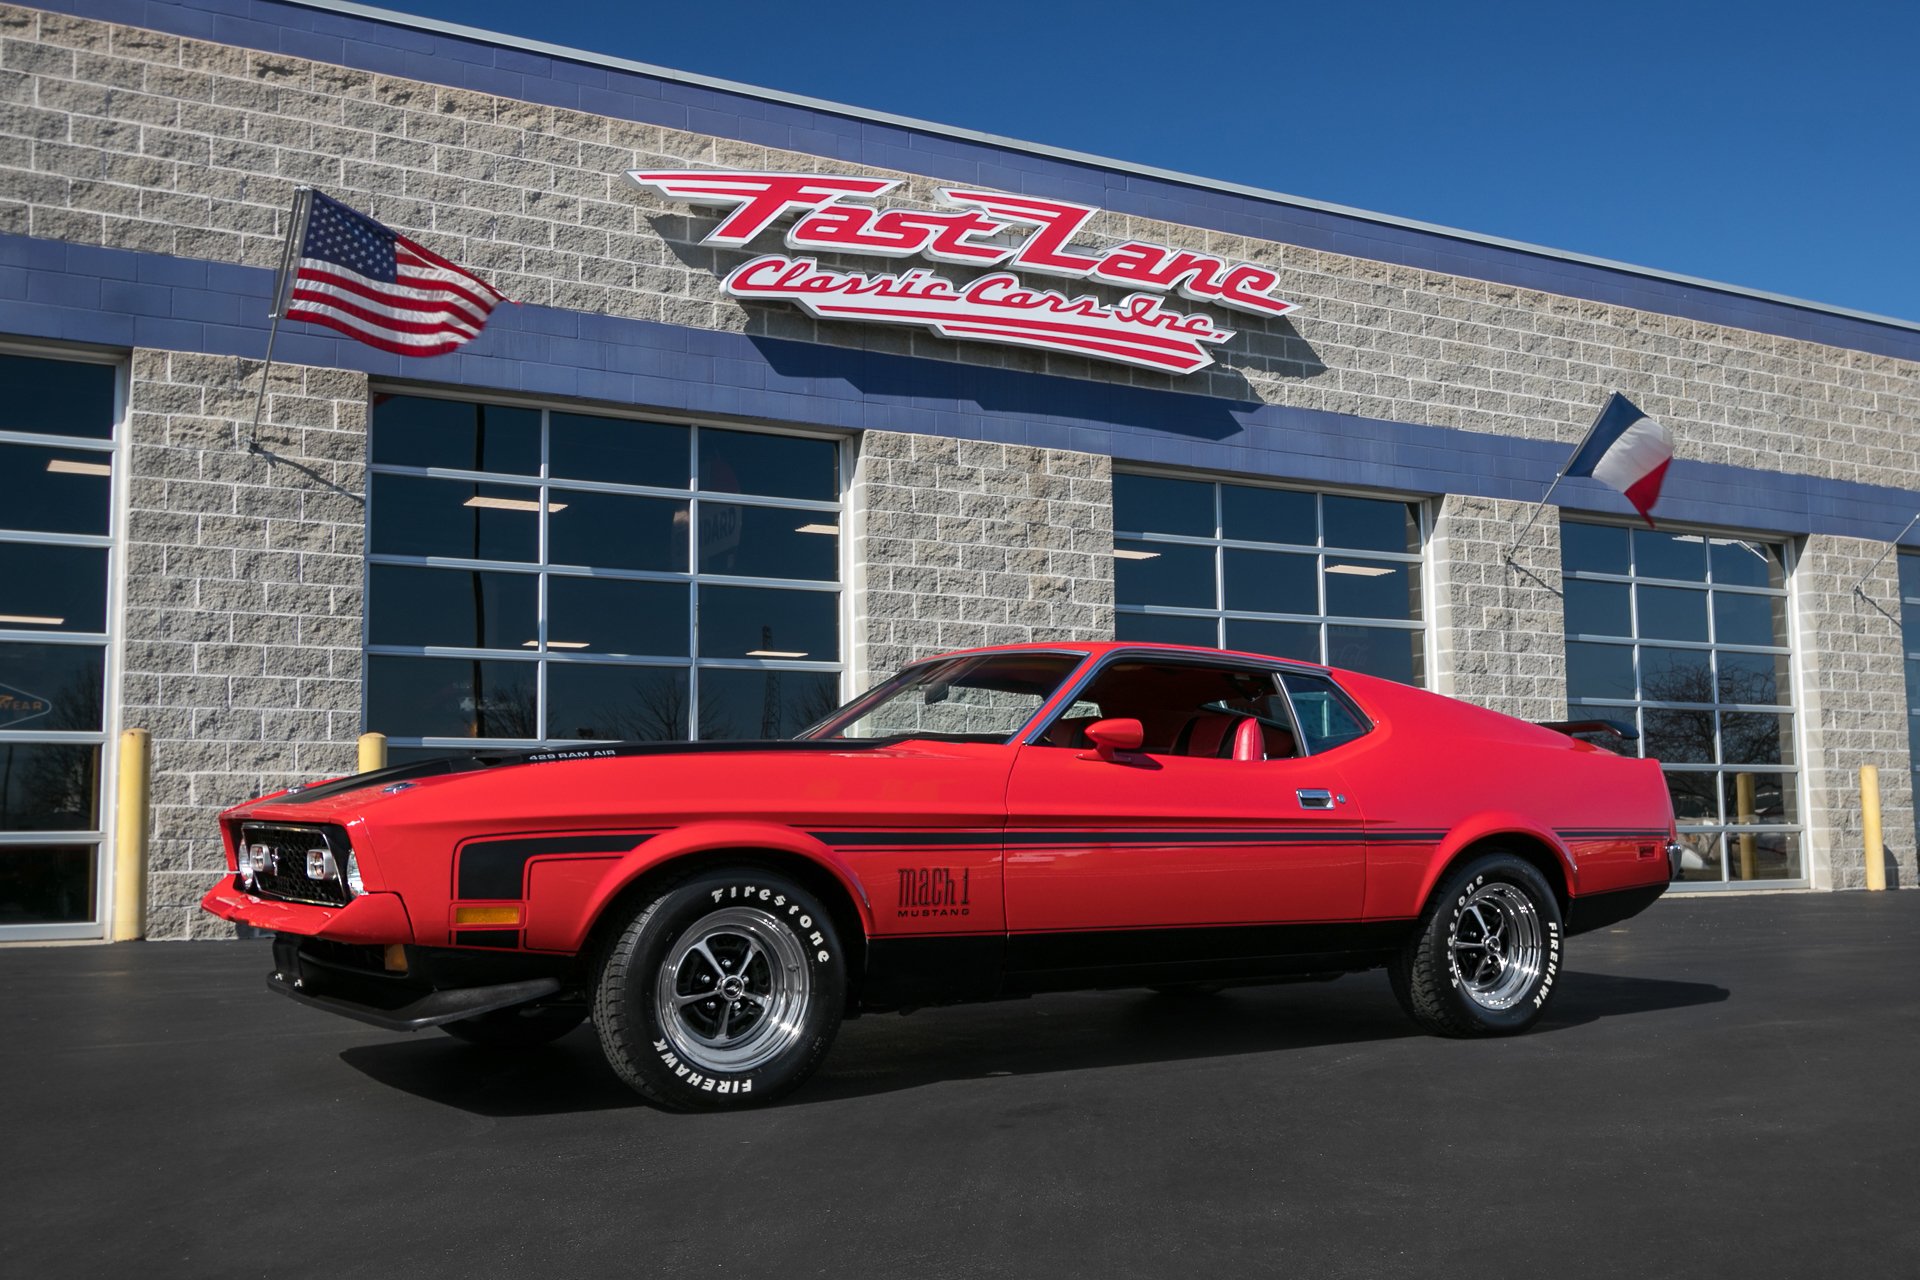 1971 ford mustang mach 1